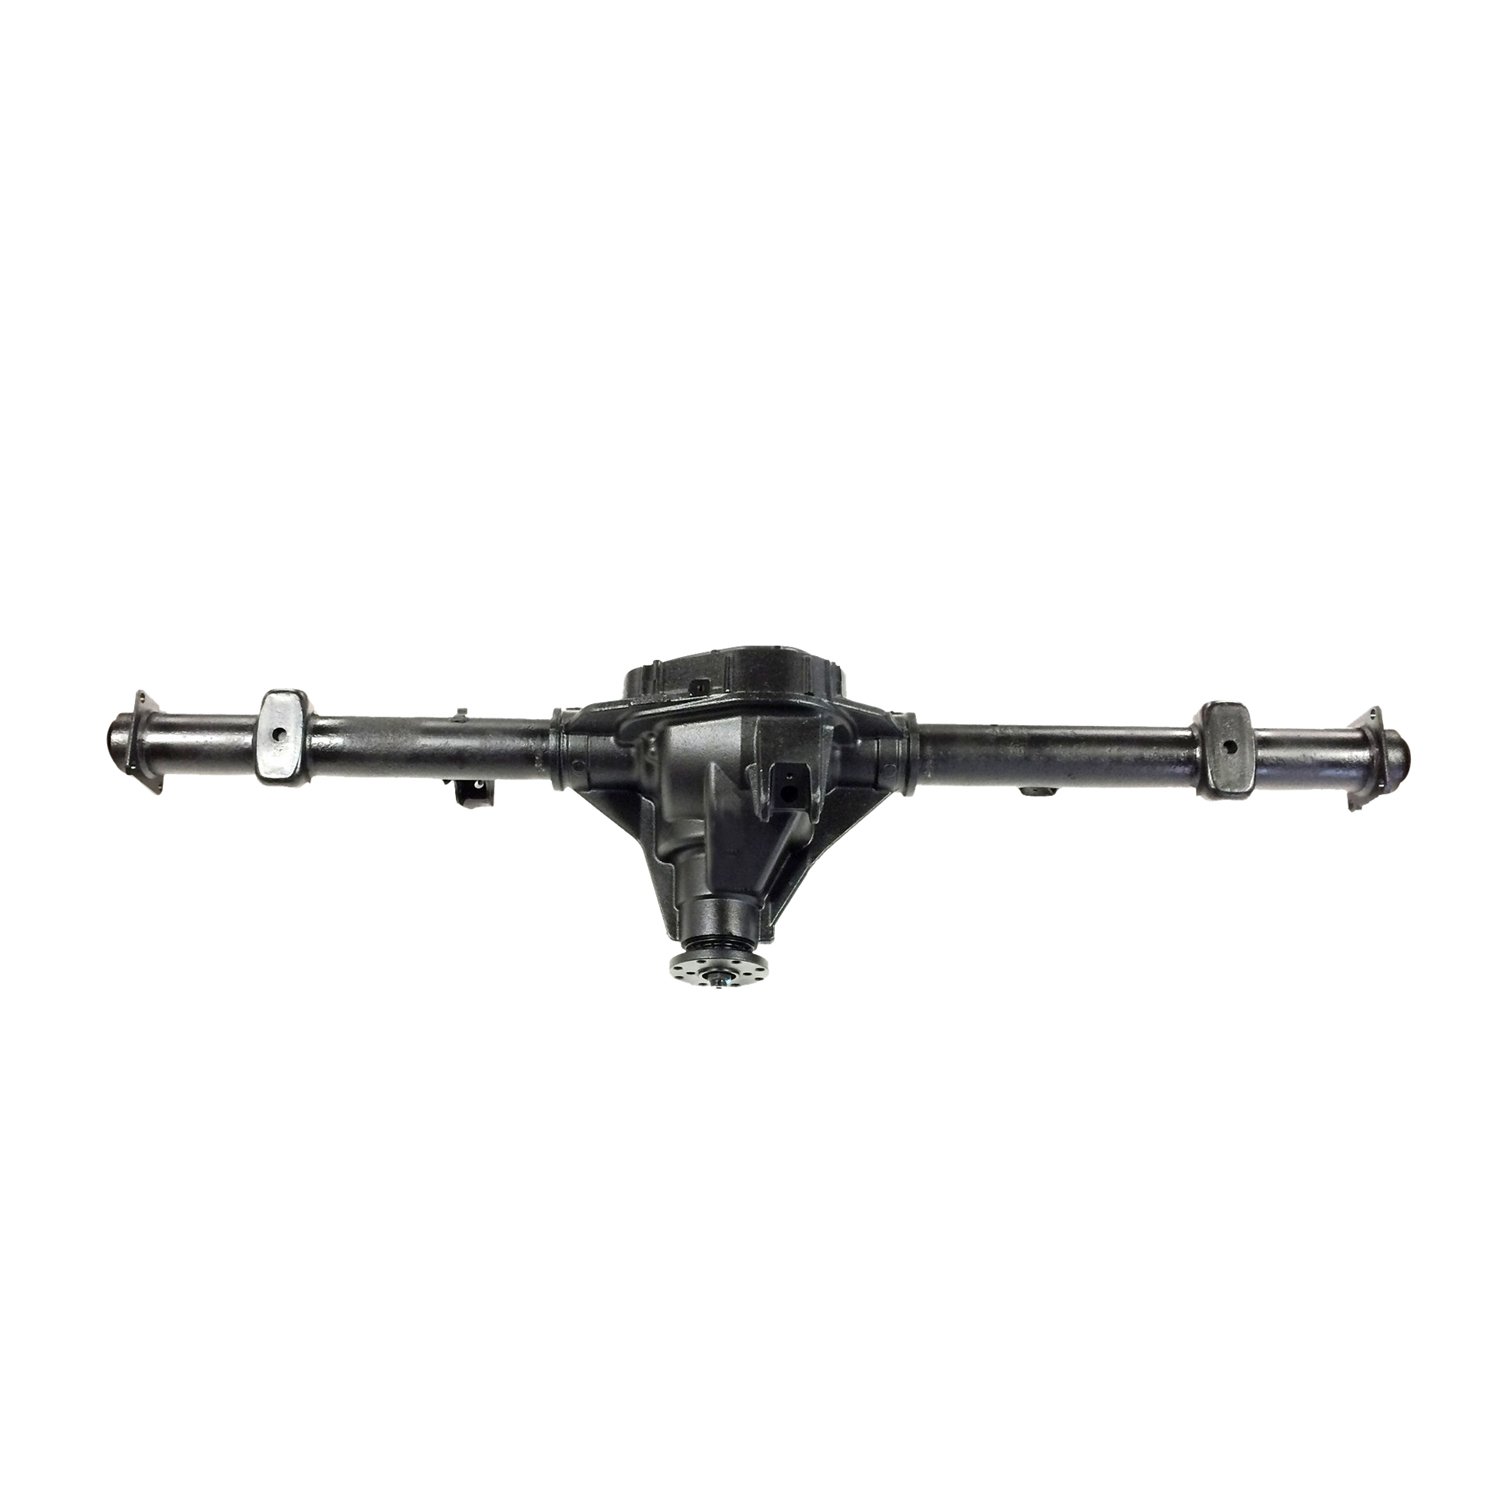 Remanufactured Complete Axle Assembly for Ford 9.75" 04-06 Ford E154 3.55 Ratio, Posi LSD